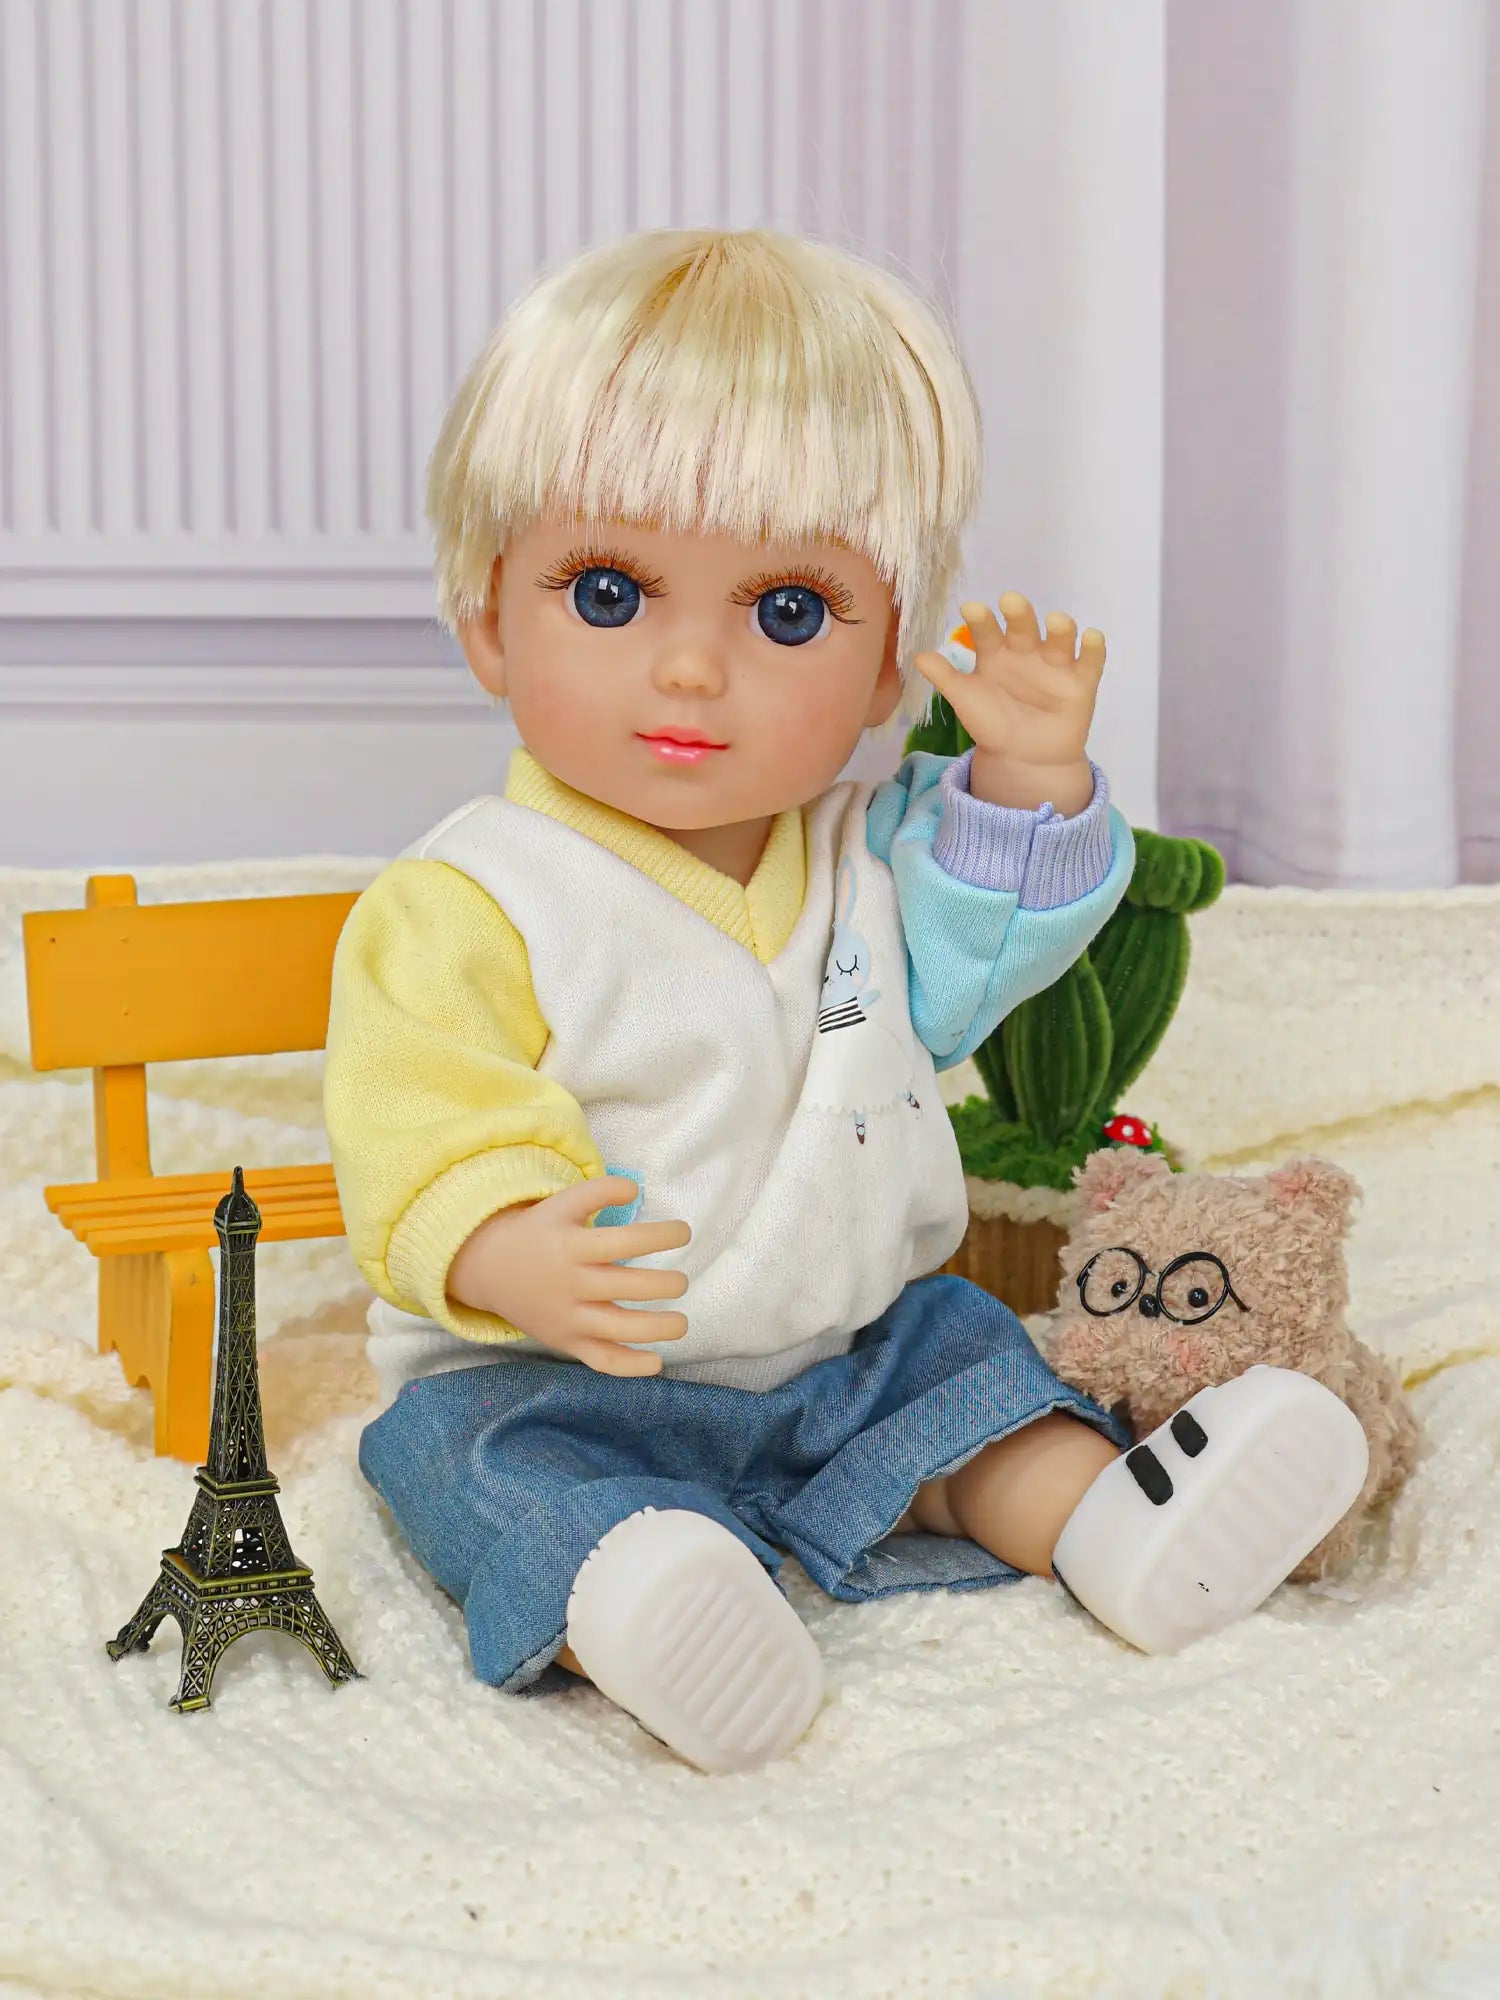 Playful doll with a friendly expression, dressed in a yellow top and blue pants, sitting on a rug.